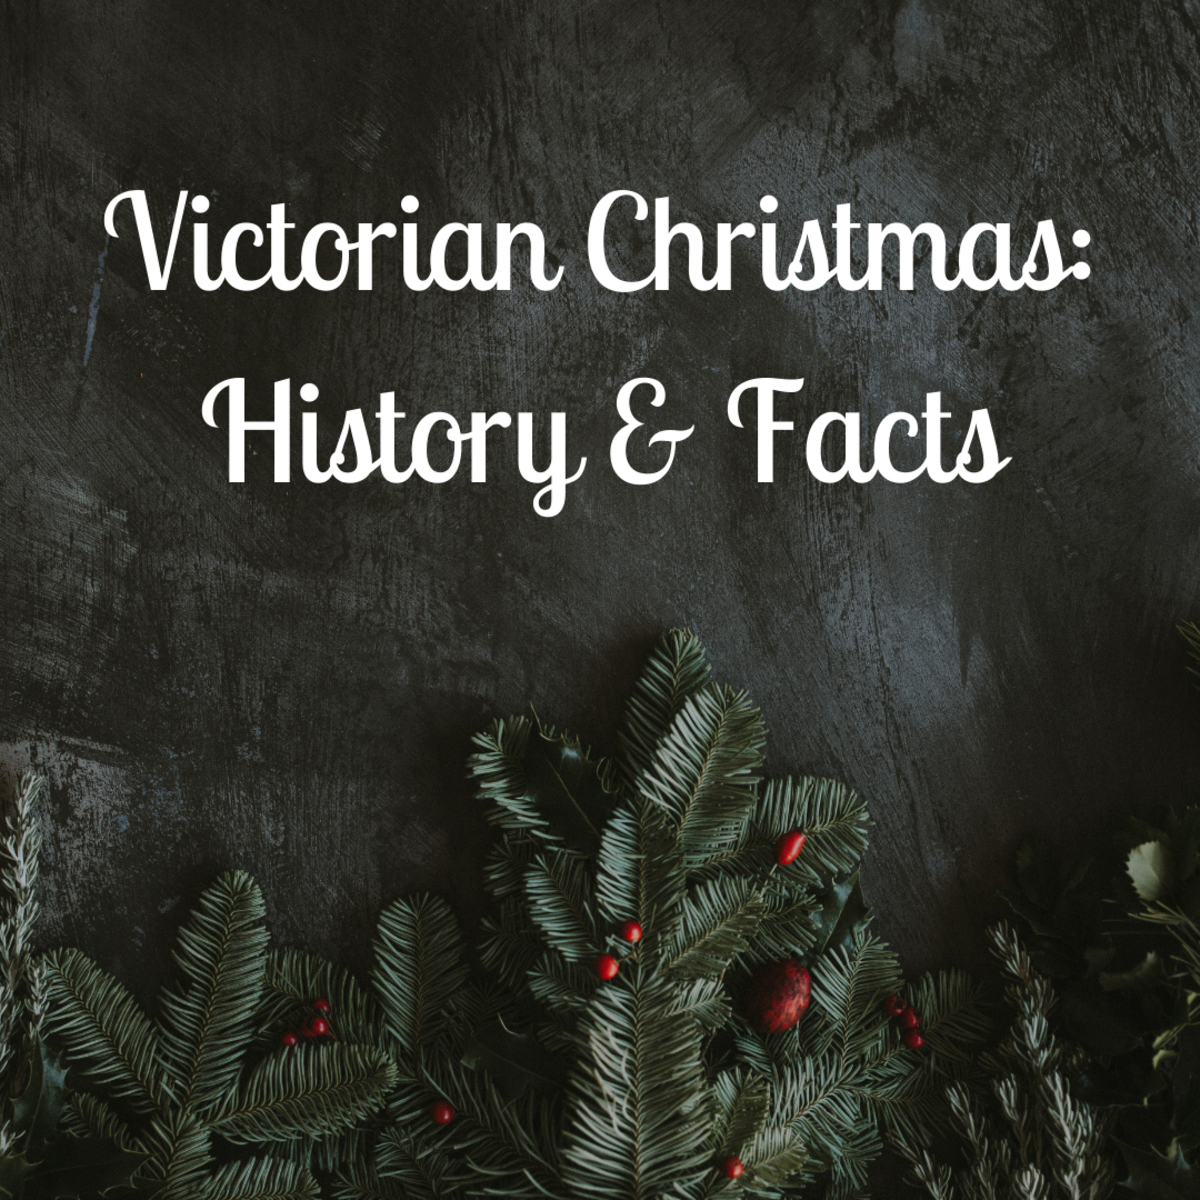 What Was Victorian Christmas Like?